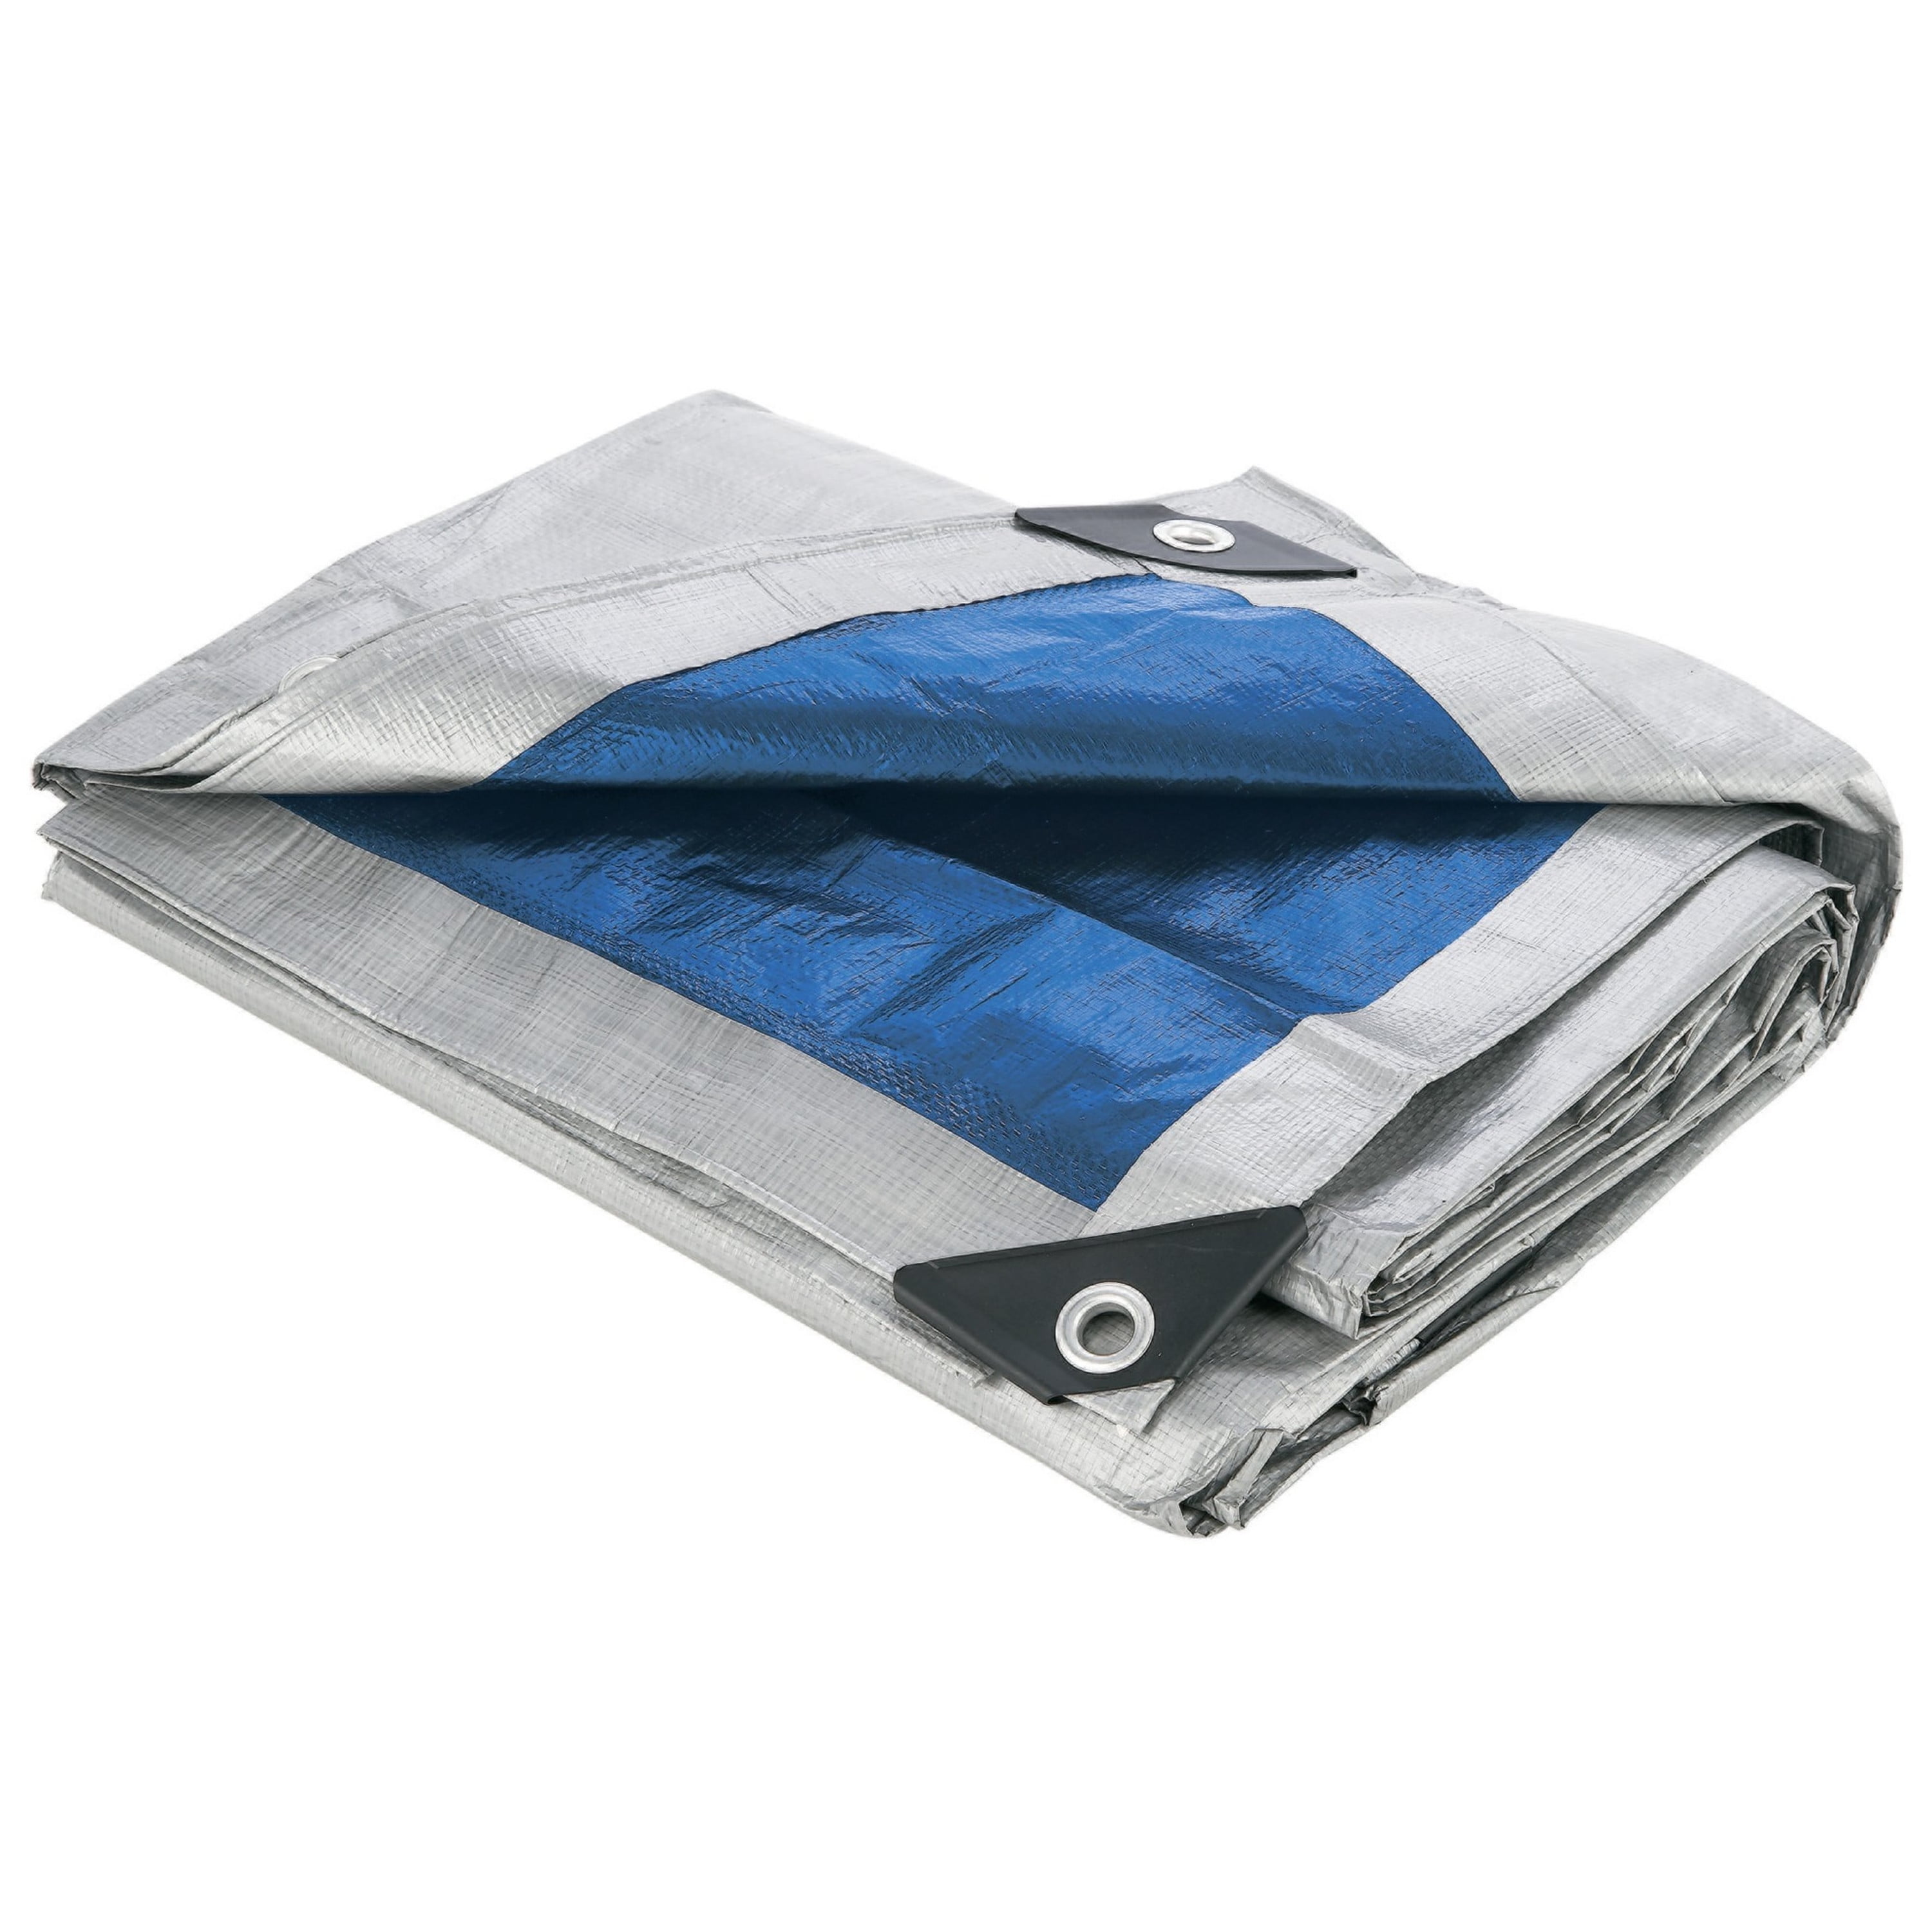 Details about   Medium Duty Poly Tarp 12' x 16' Blue/Brown 5 Mil Thickness Shelter Canopy 